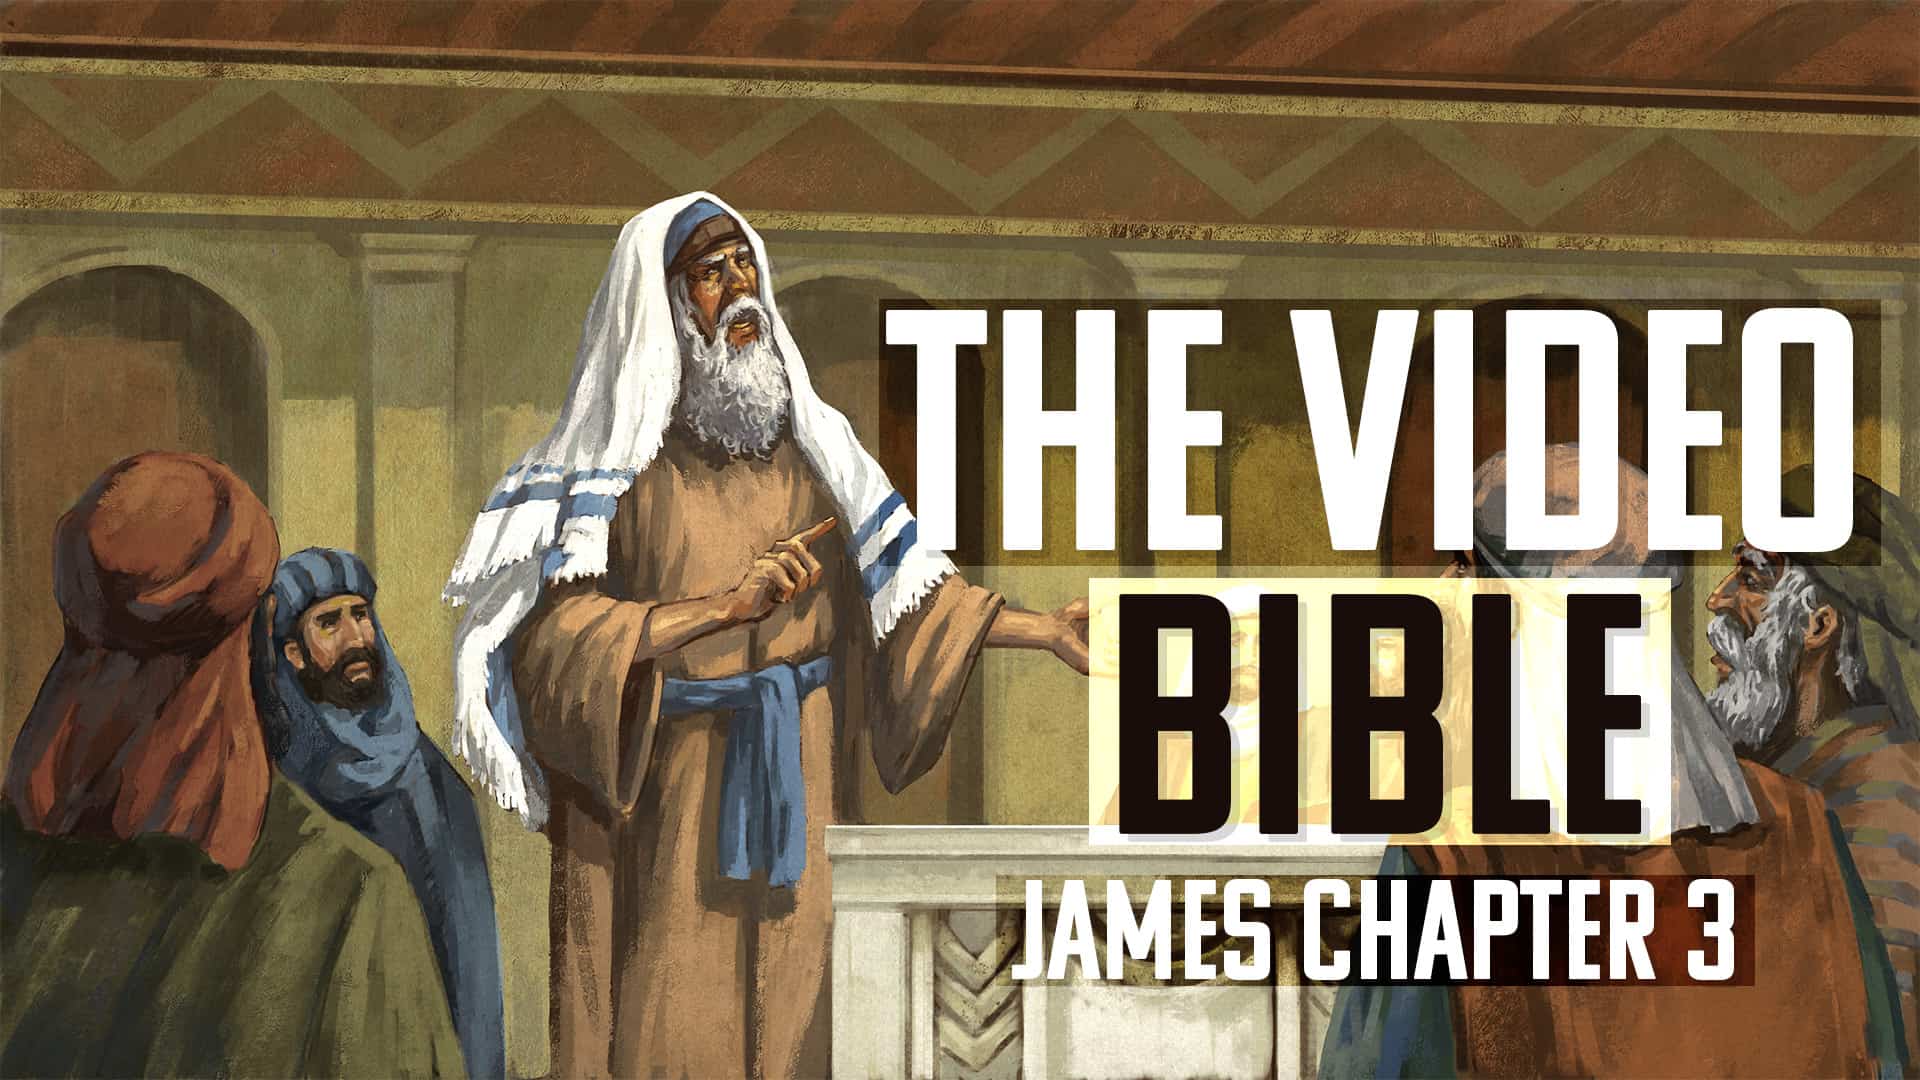 Cover image for book of James Chapter 3